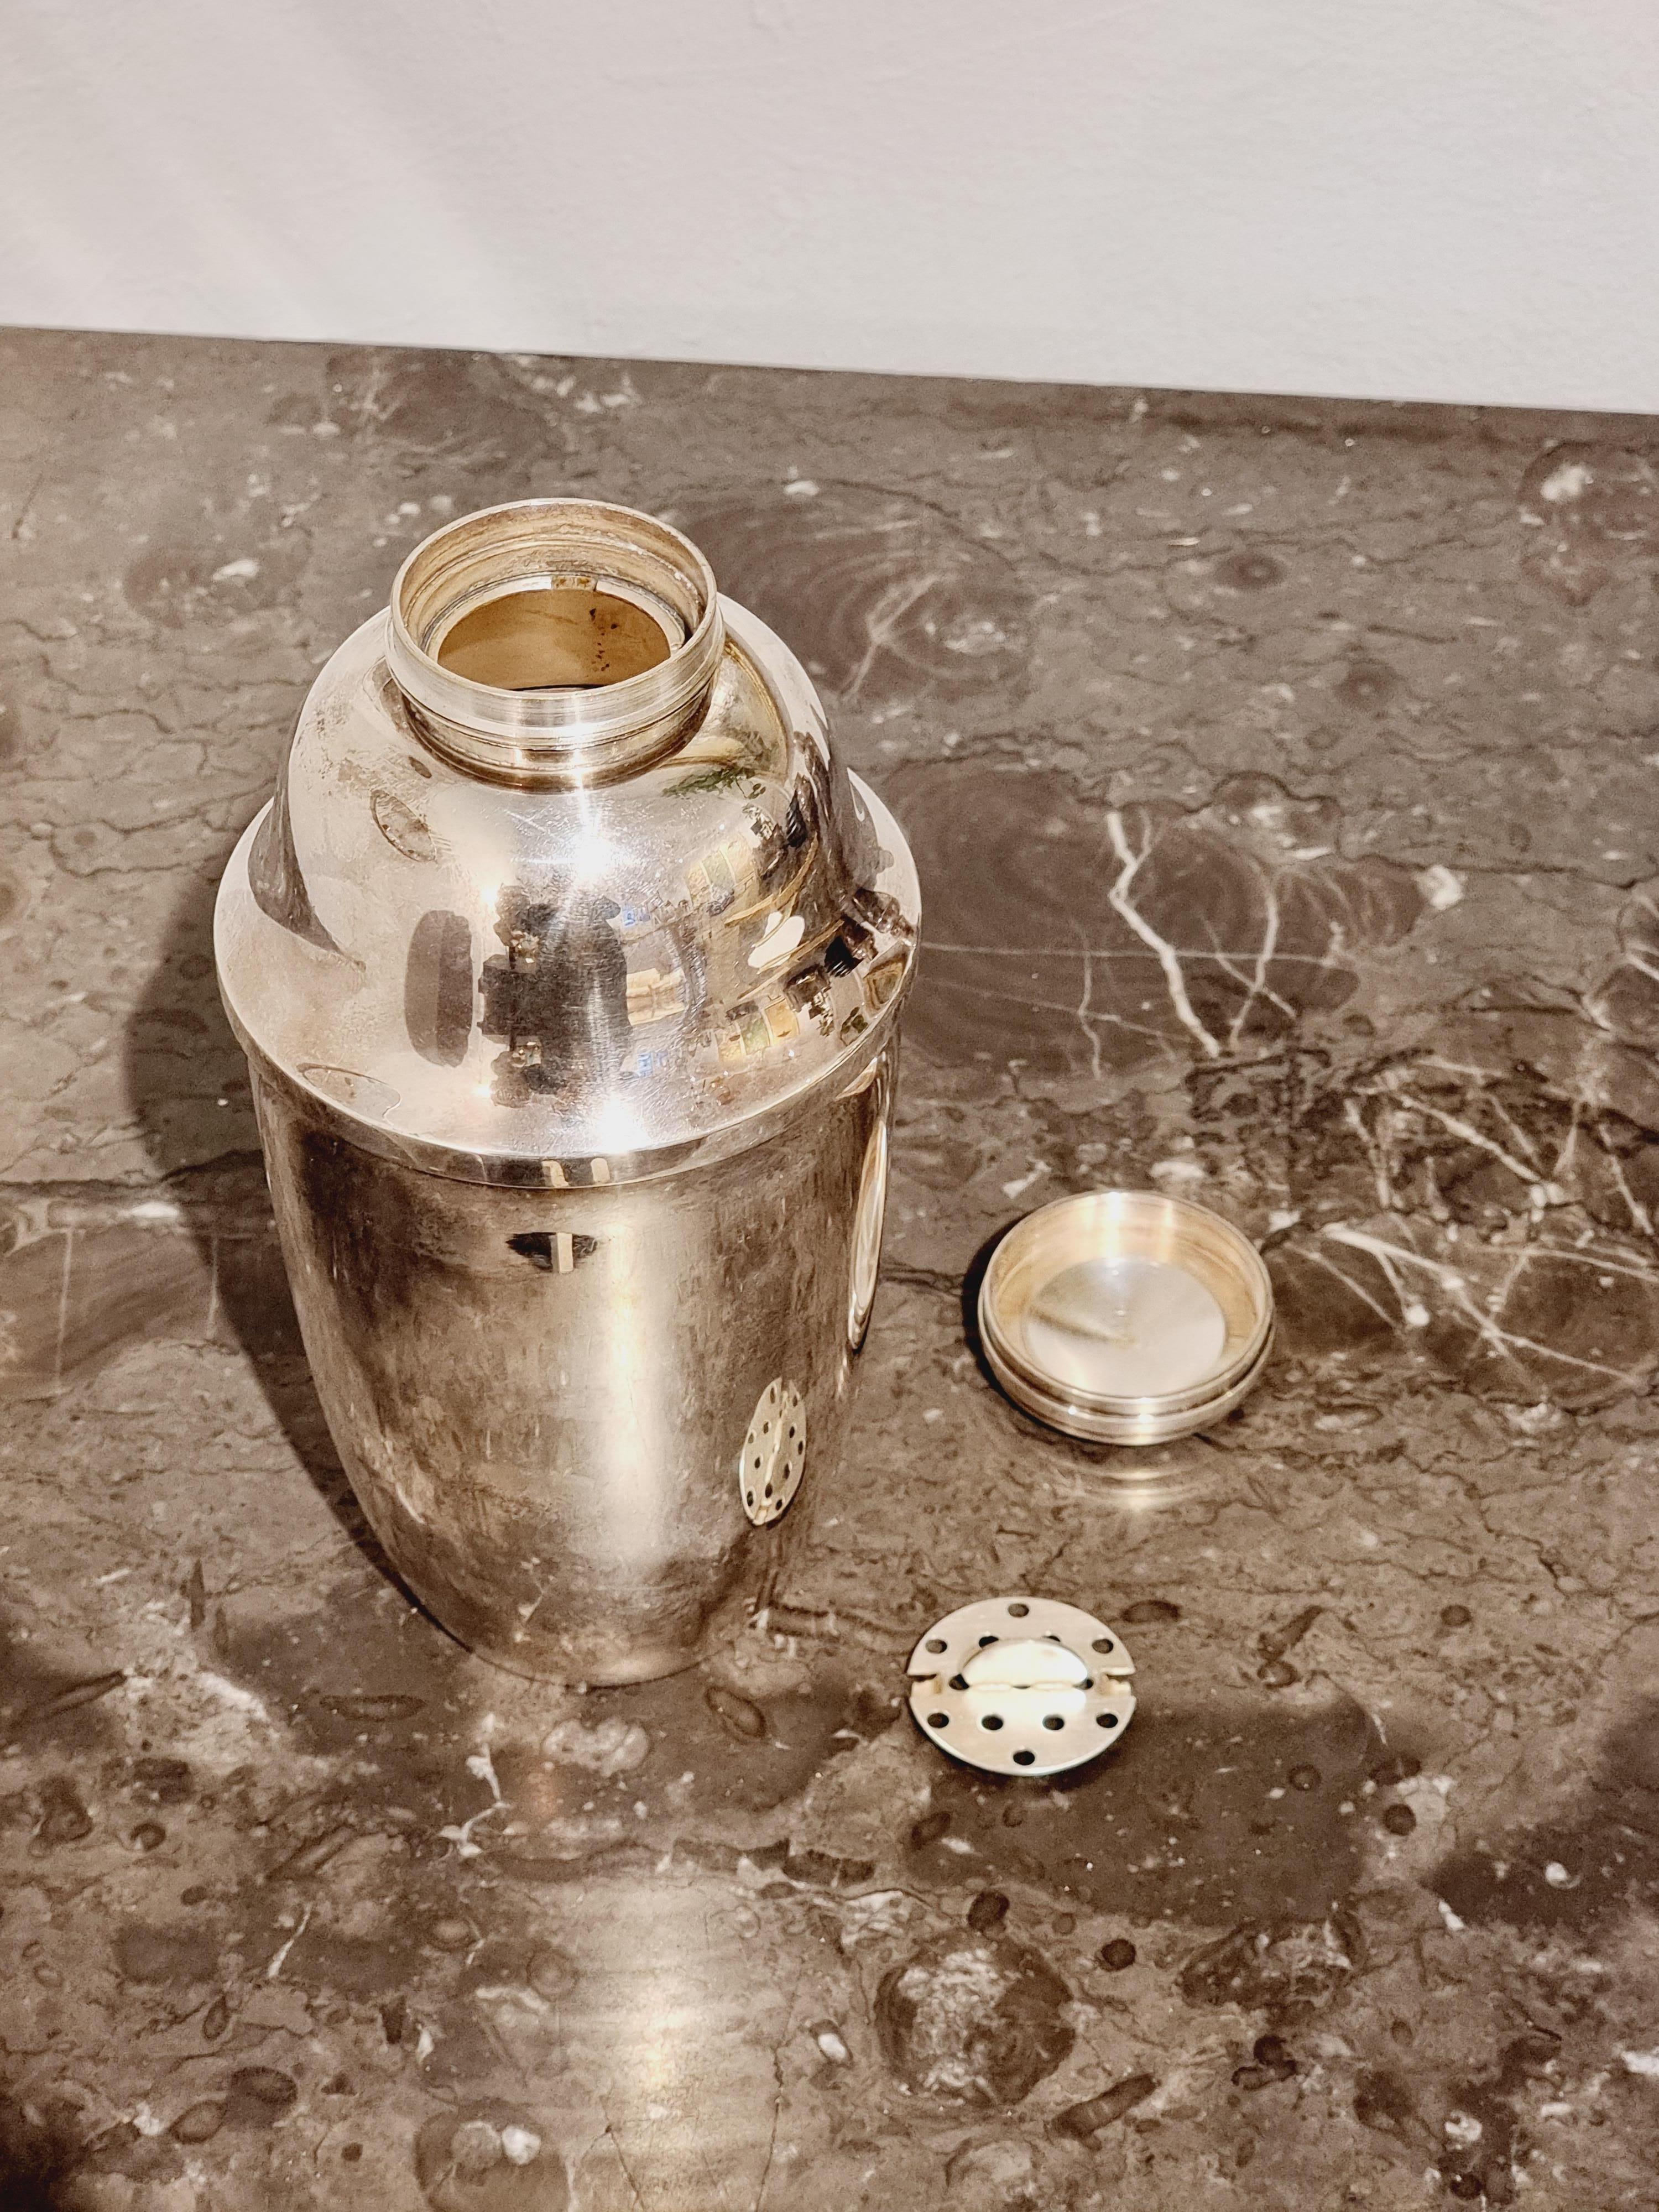 Silver-plated shaker designed by Sylvia Stave for court jeweller CG Hallberg, Sweden 1930s / Swedish Grace.

With hallmarks. In good condition, hard to open the larger top part, easy to open the smaller top.

